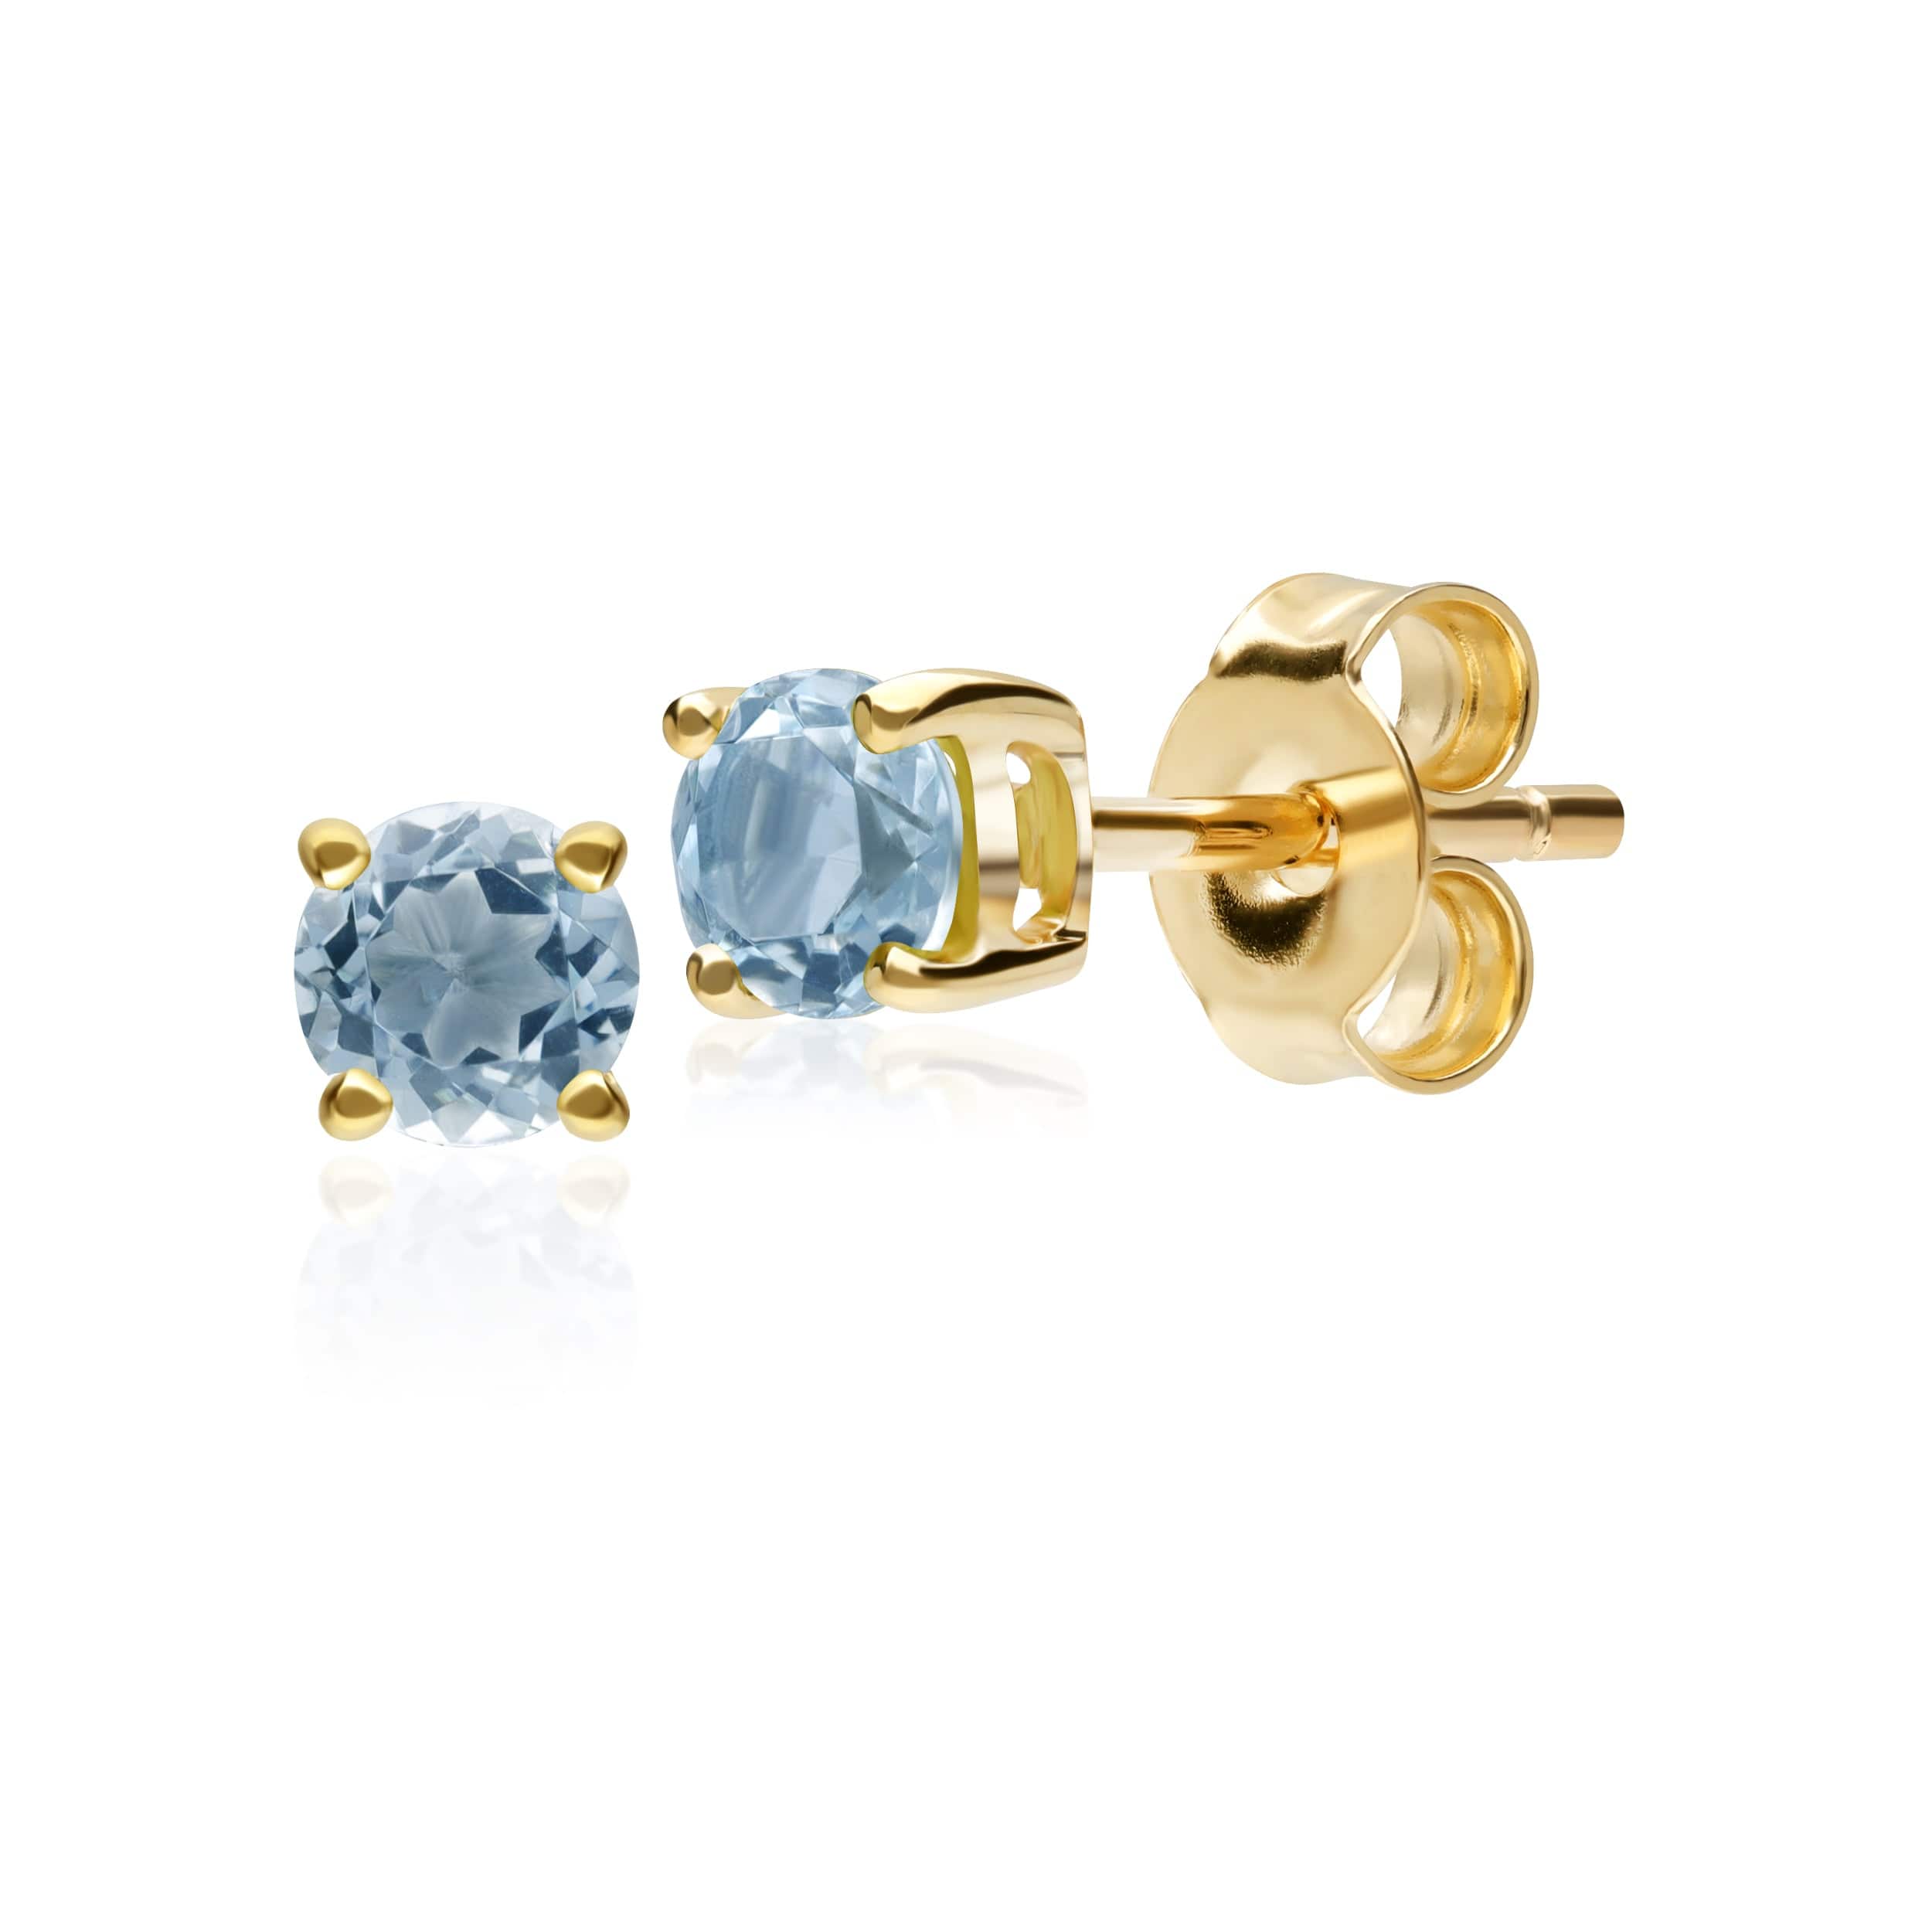 11567 Classic Round Aquamarine Stud Earrings in 9ct Yellow Gold 3.5mm 1